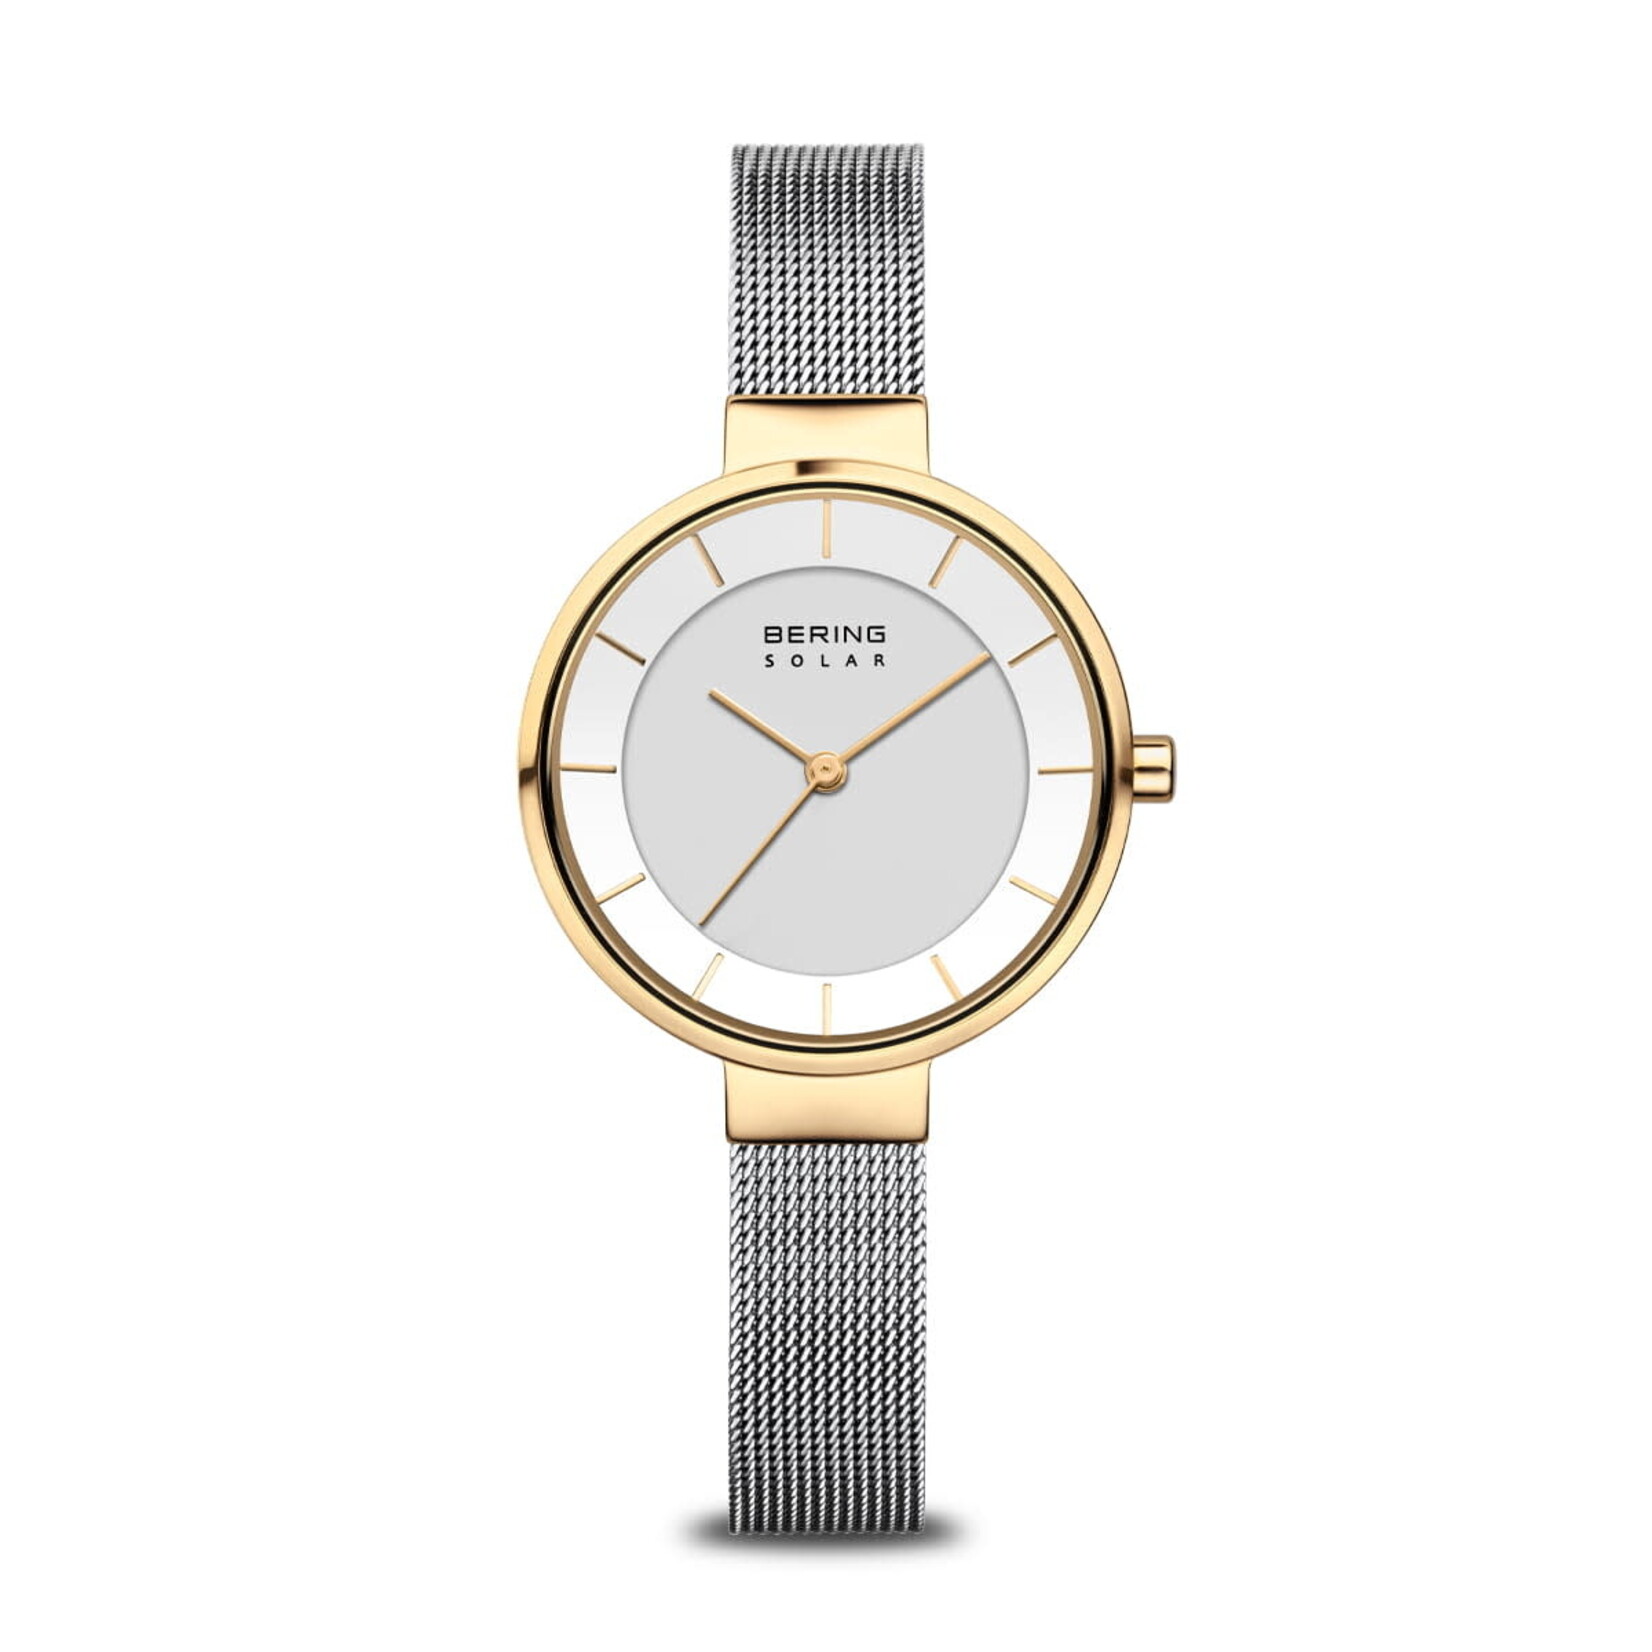 Bering Solar Two Tone Brushed Gold Watch